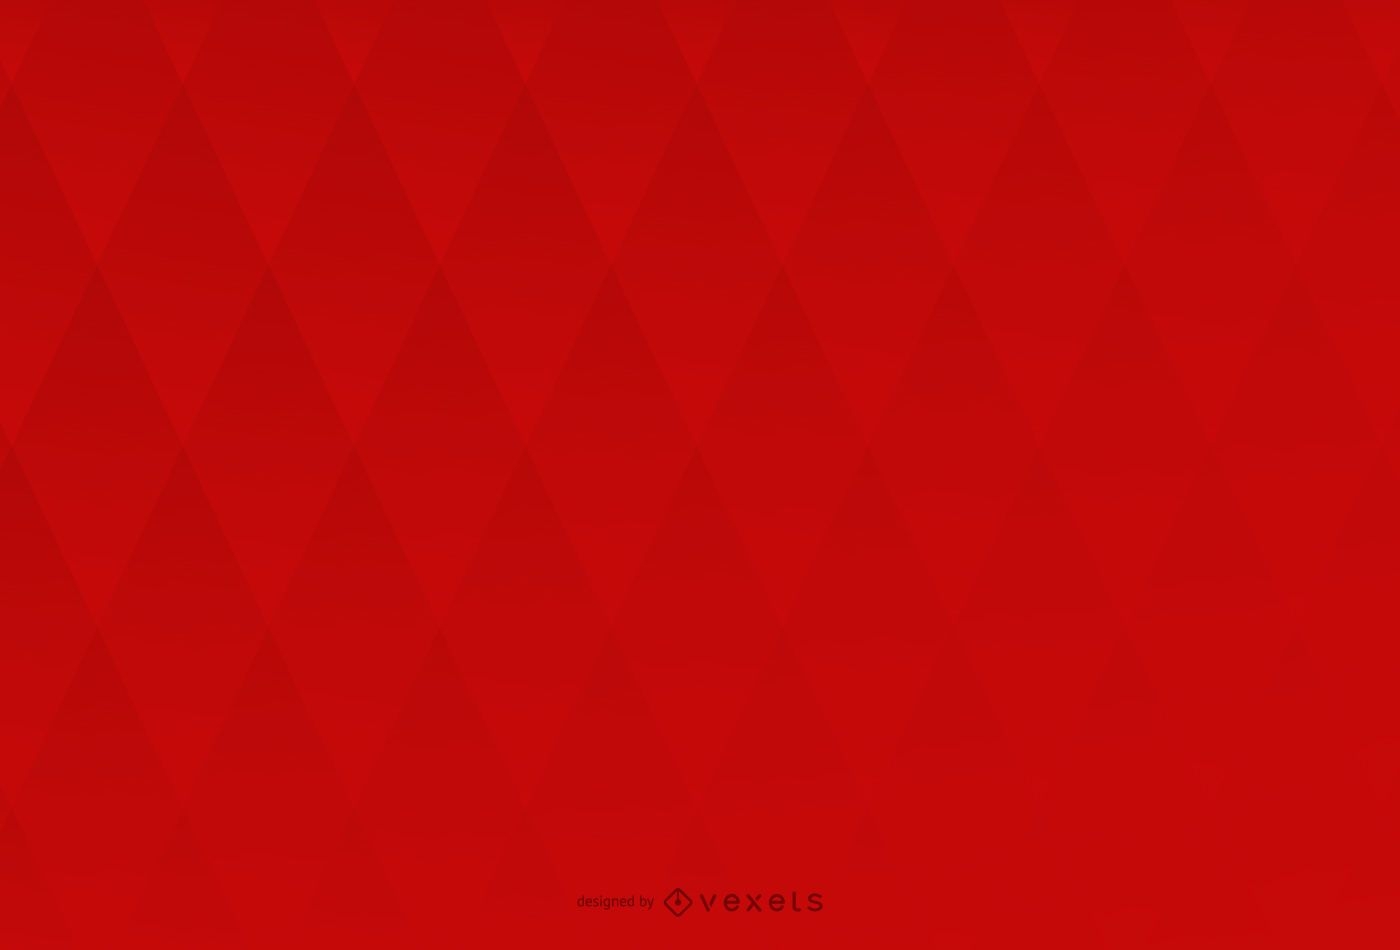 Red background design with rhombus